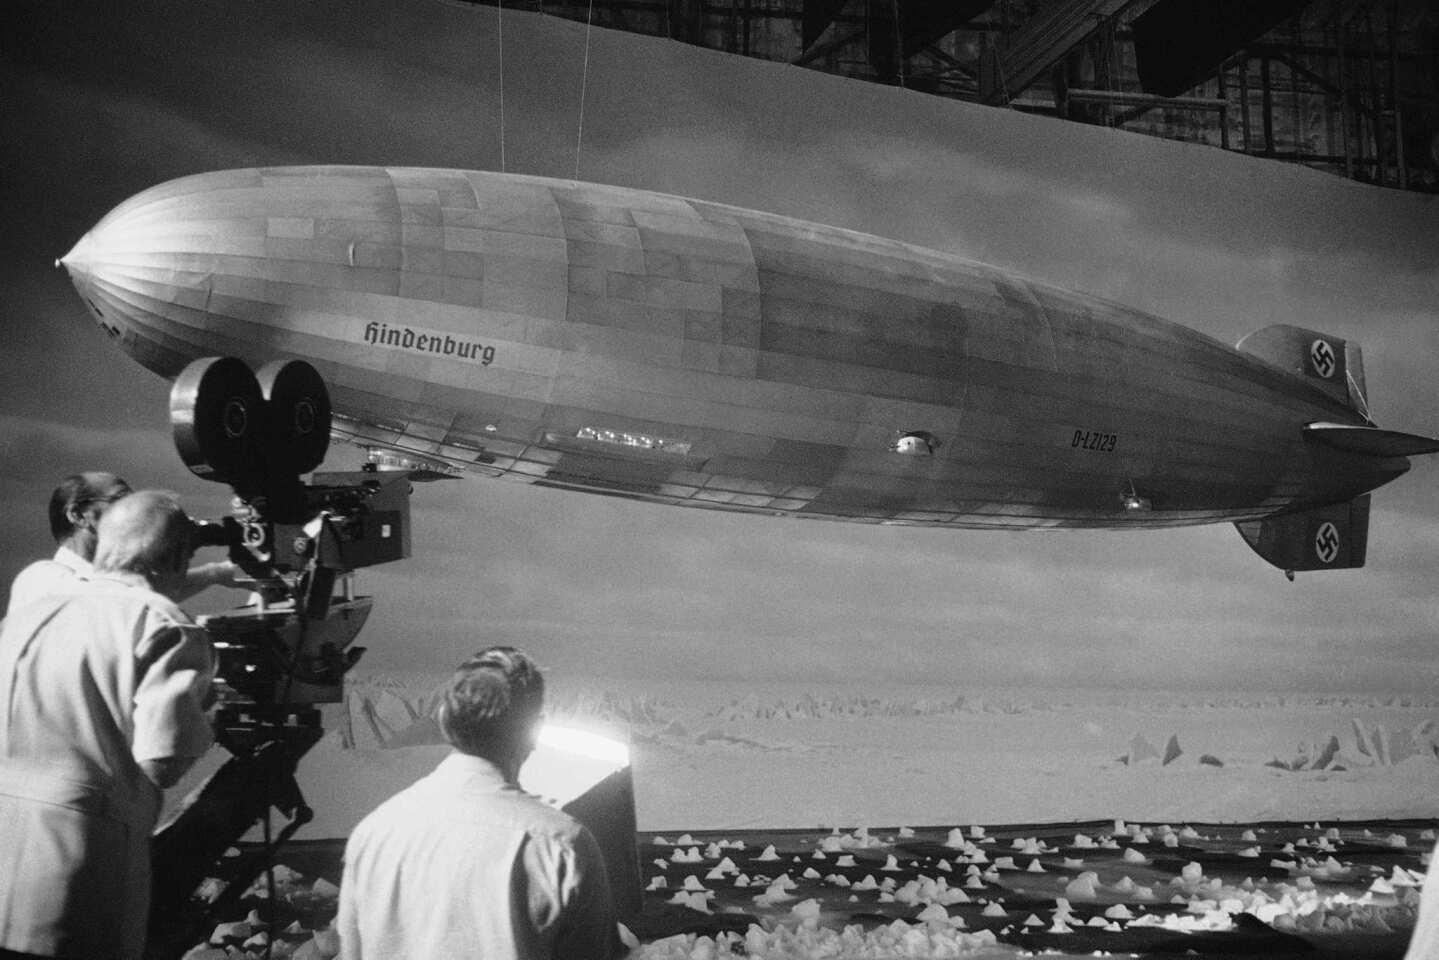 Special effects artists shoot the model of the dirigible the Hindenberg during the filming of Robert Wise's "The Hindenberg" on Aug. 18, 1974, at Universal Studios in Los Angeles.